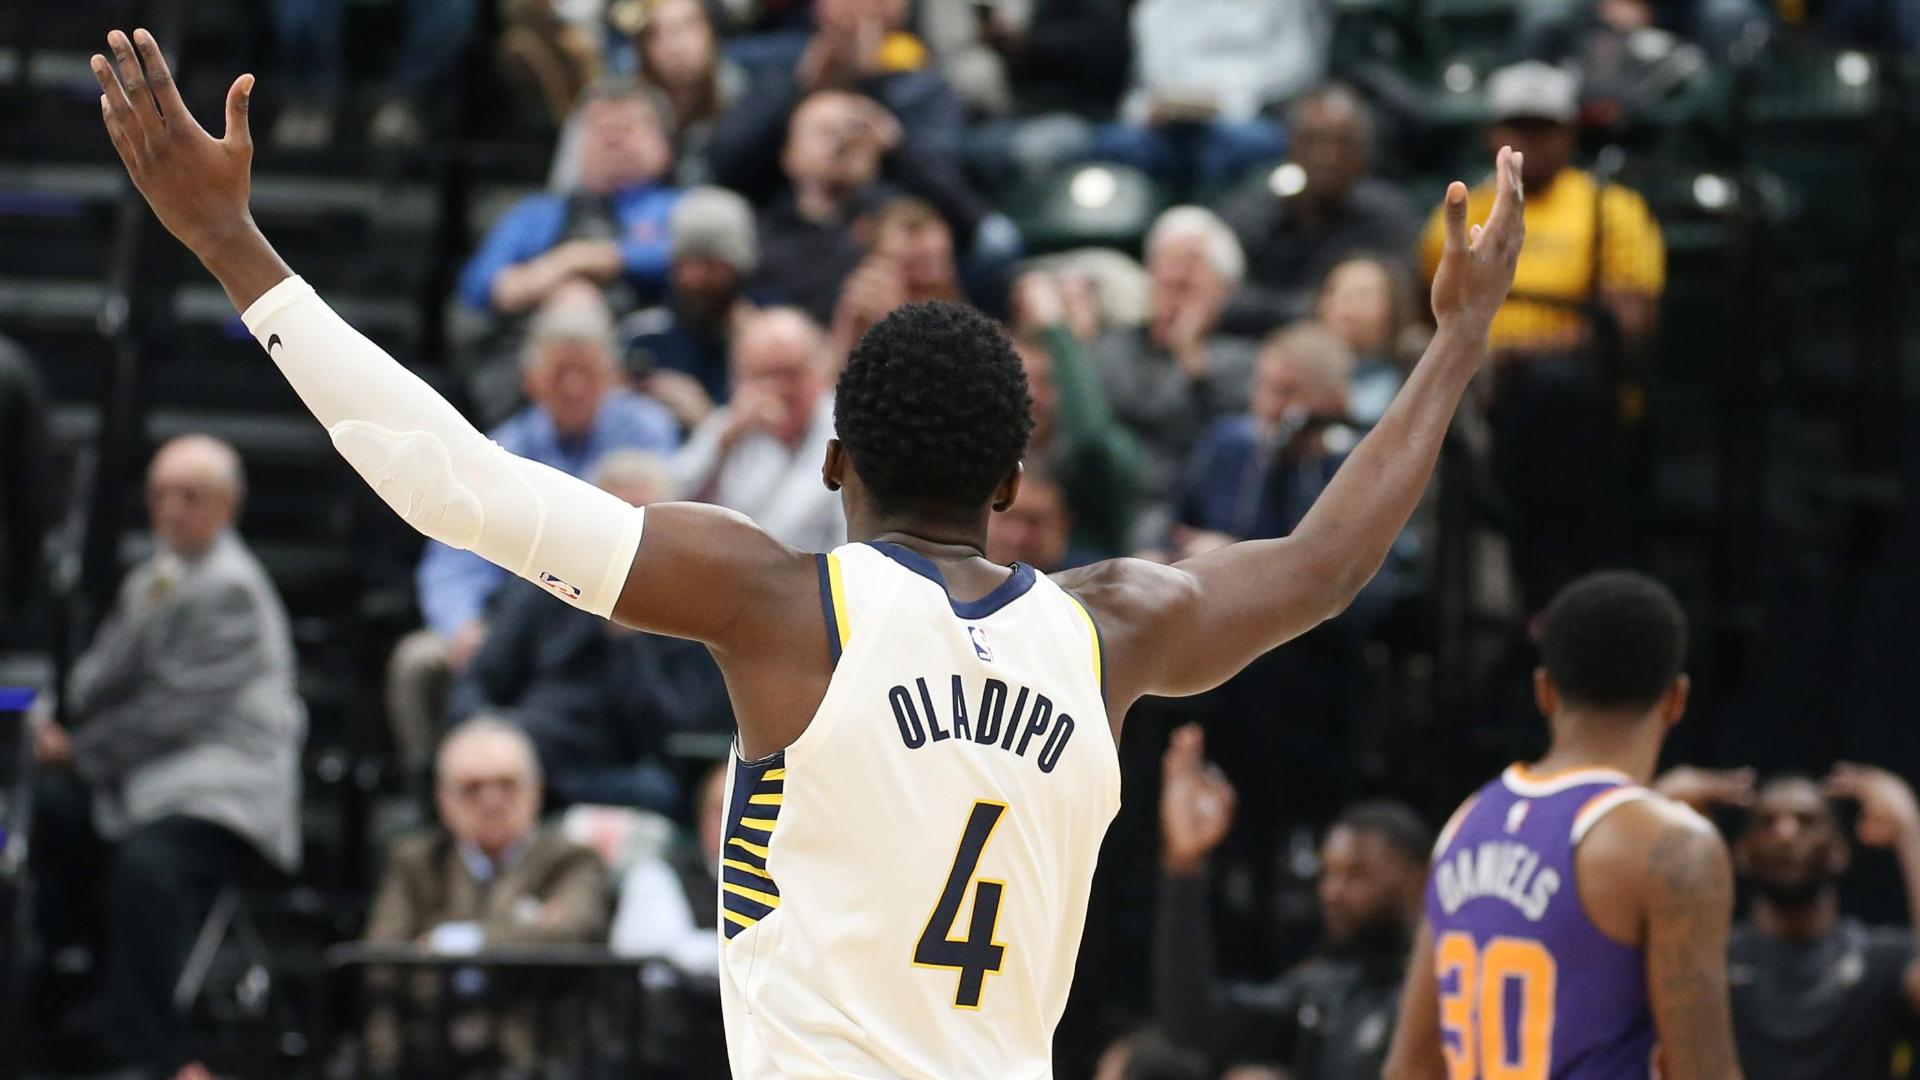 Victor Oladipo Stats, News, Videos, Highlights, Pictures, Bio - Indiana Pacers - ESPN1920 x 1080